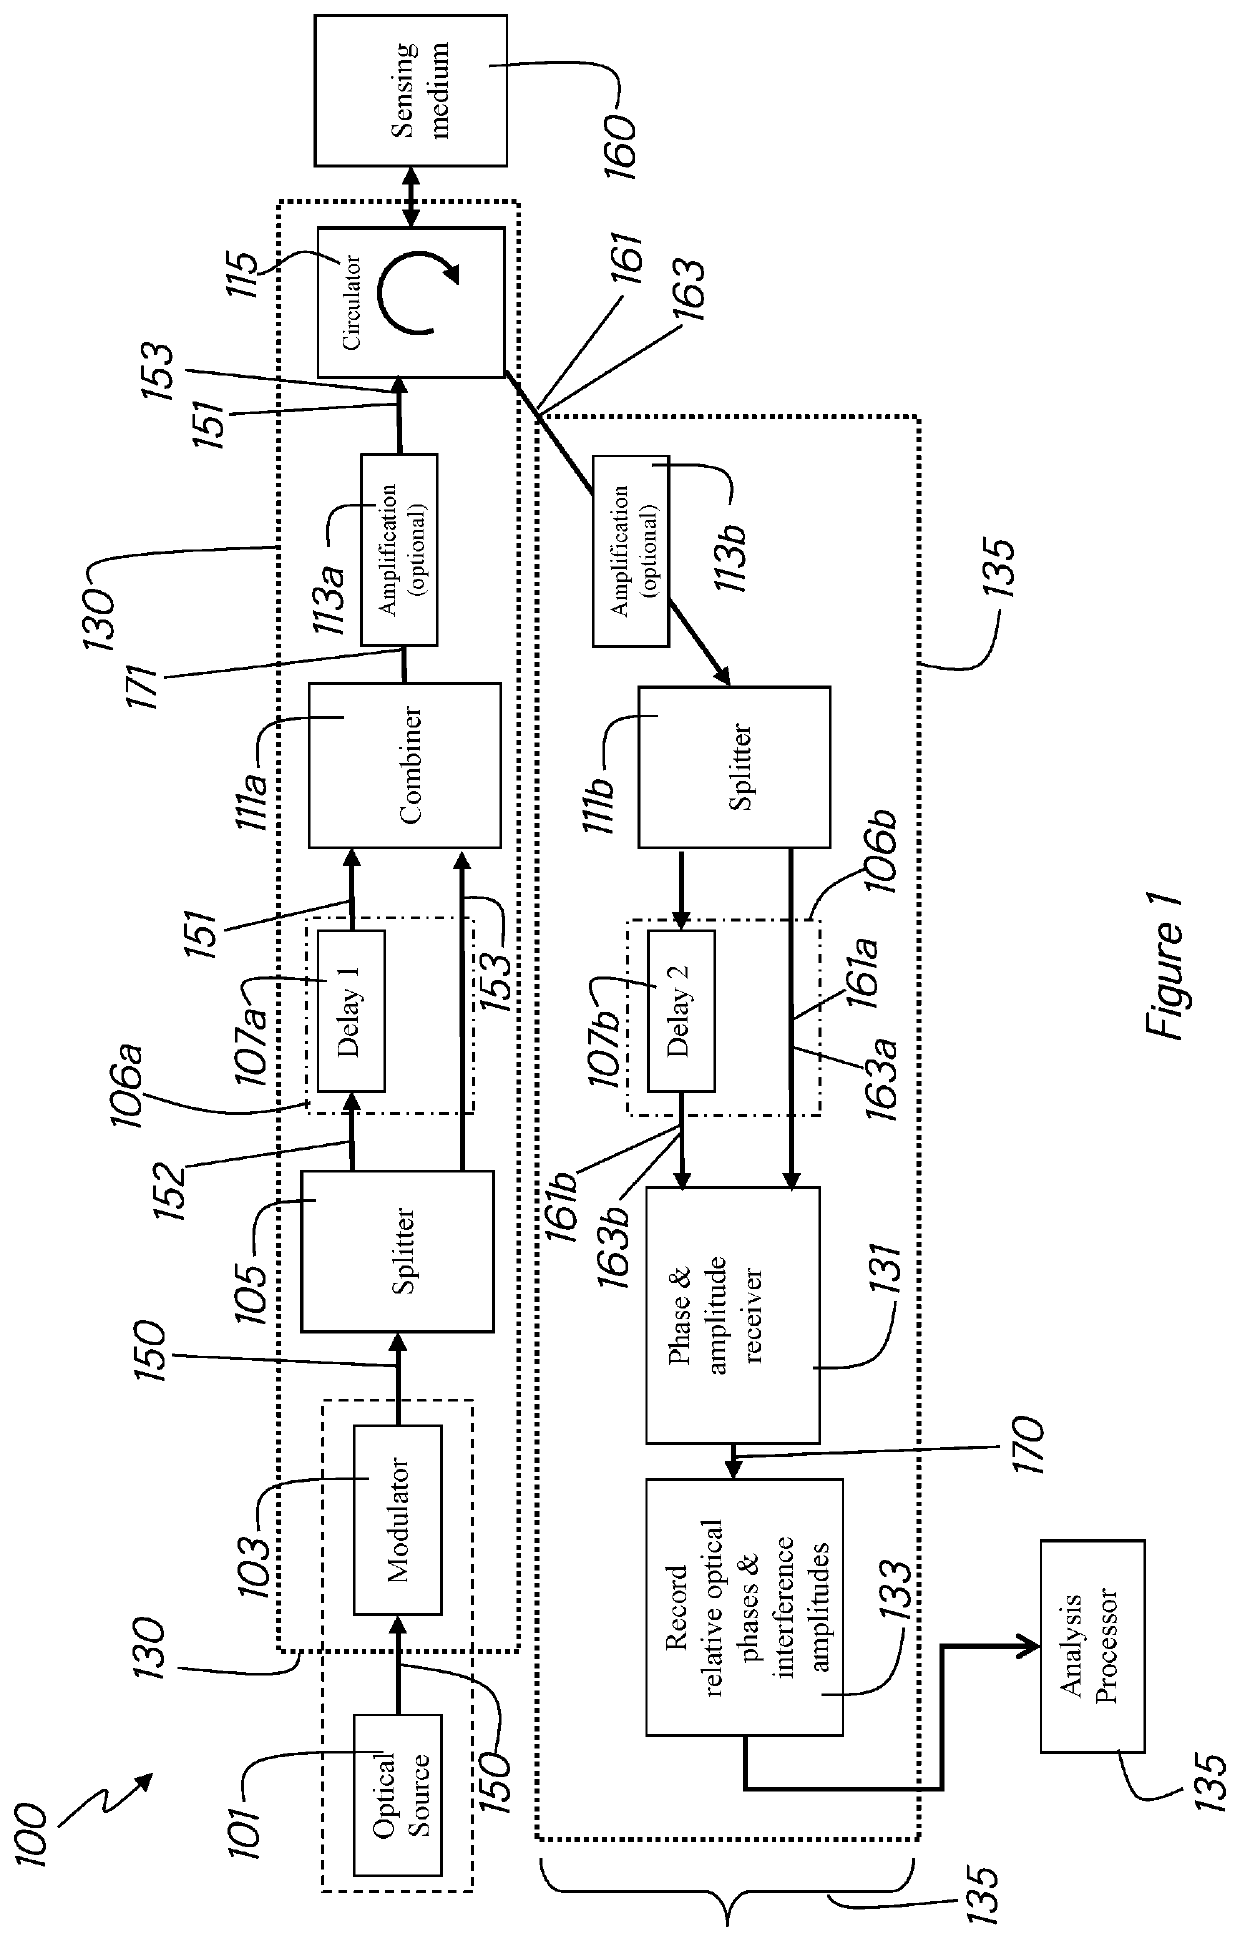 Distributed optical sensing systems and methods